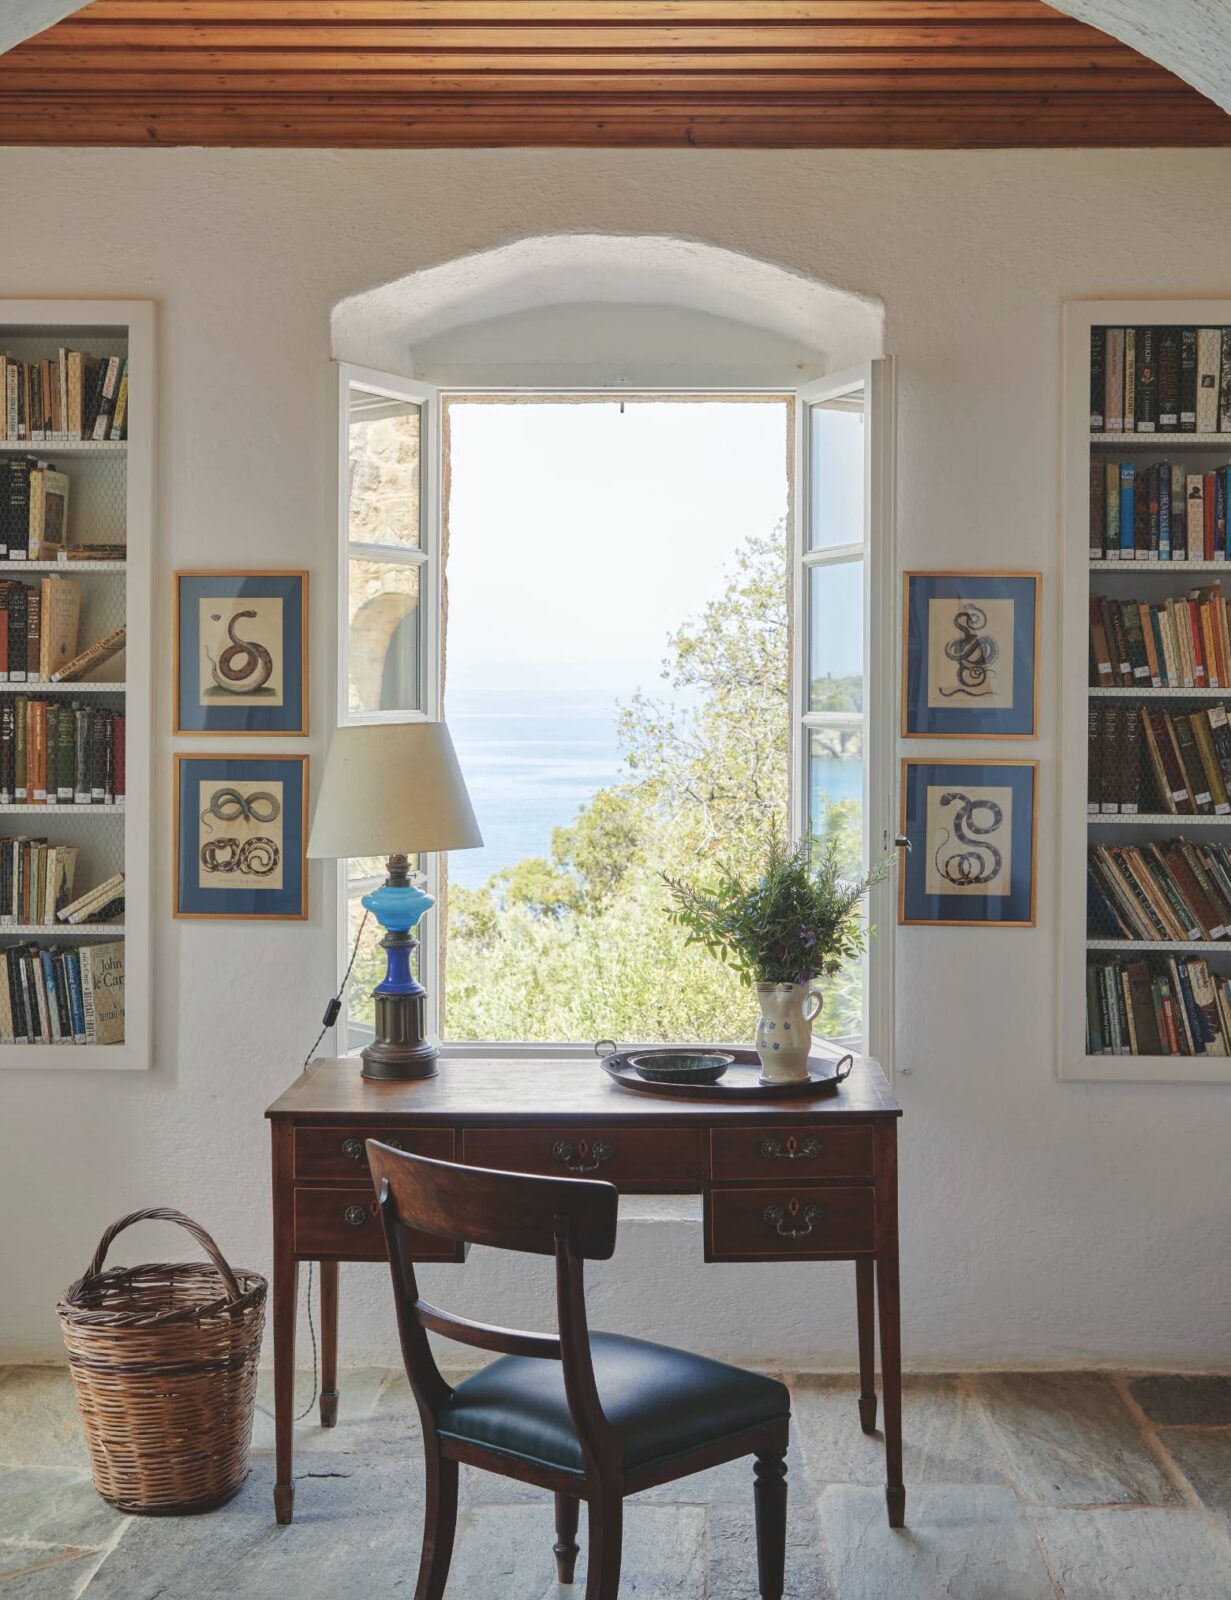 Patrick Leigh Fermor house. An antique wood desk sits in front of an open window and overlooks the sea in the distance.